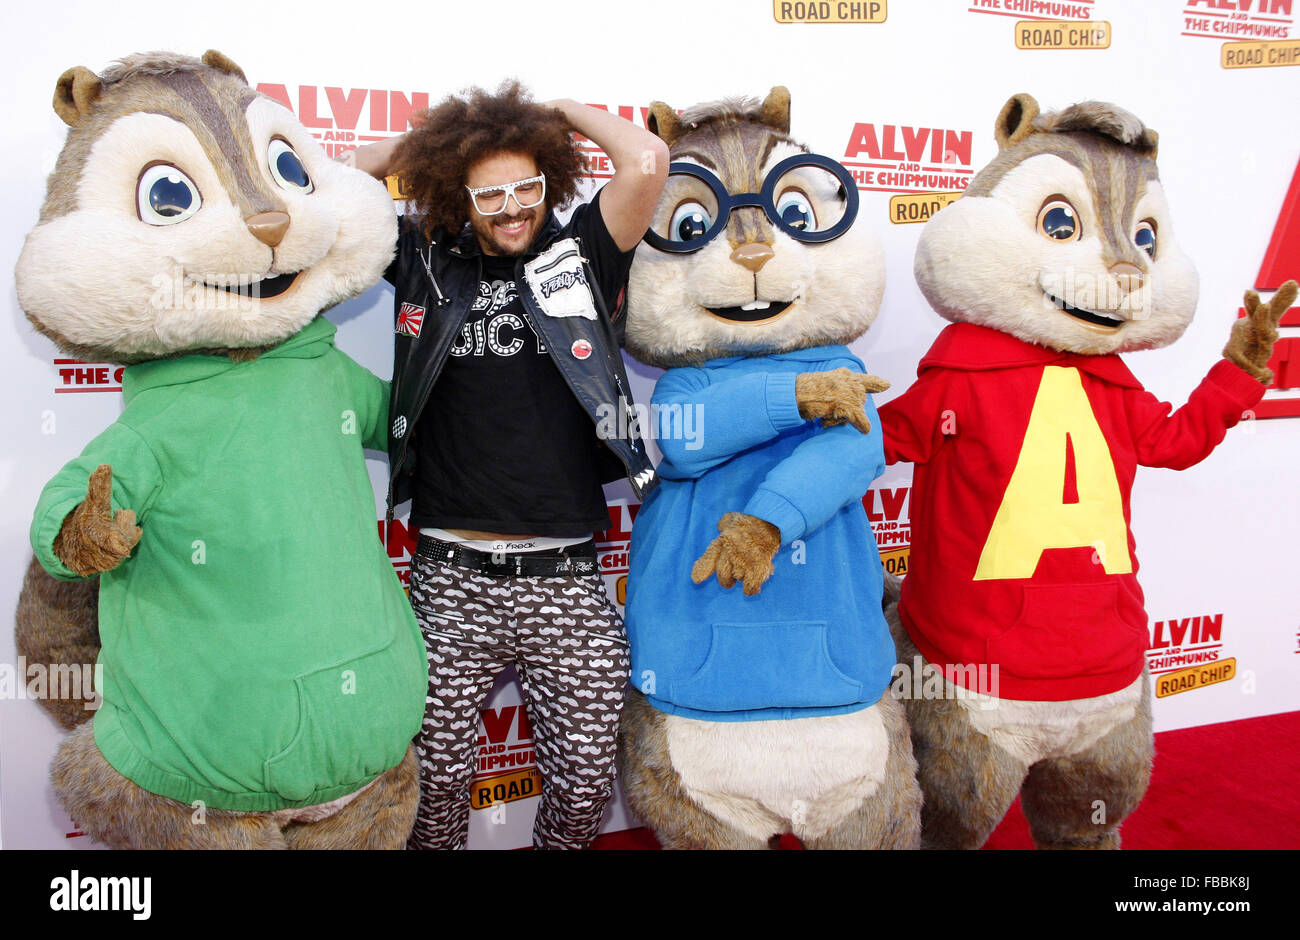 Los Angeles premiere of 'Alvin And The Chipmunks: The Road Chip' held at the Zanuck Theater - Arrivals  Featuring: Redfoo Where: Los Angeles, California, United States When: 12 Dec 2015 Stock Photo